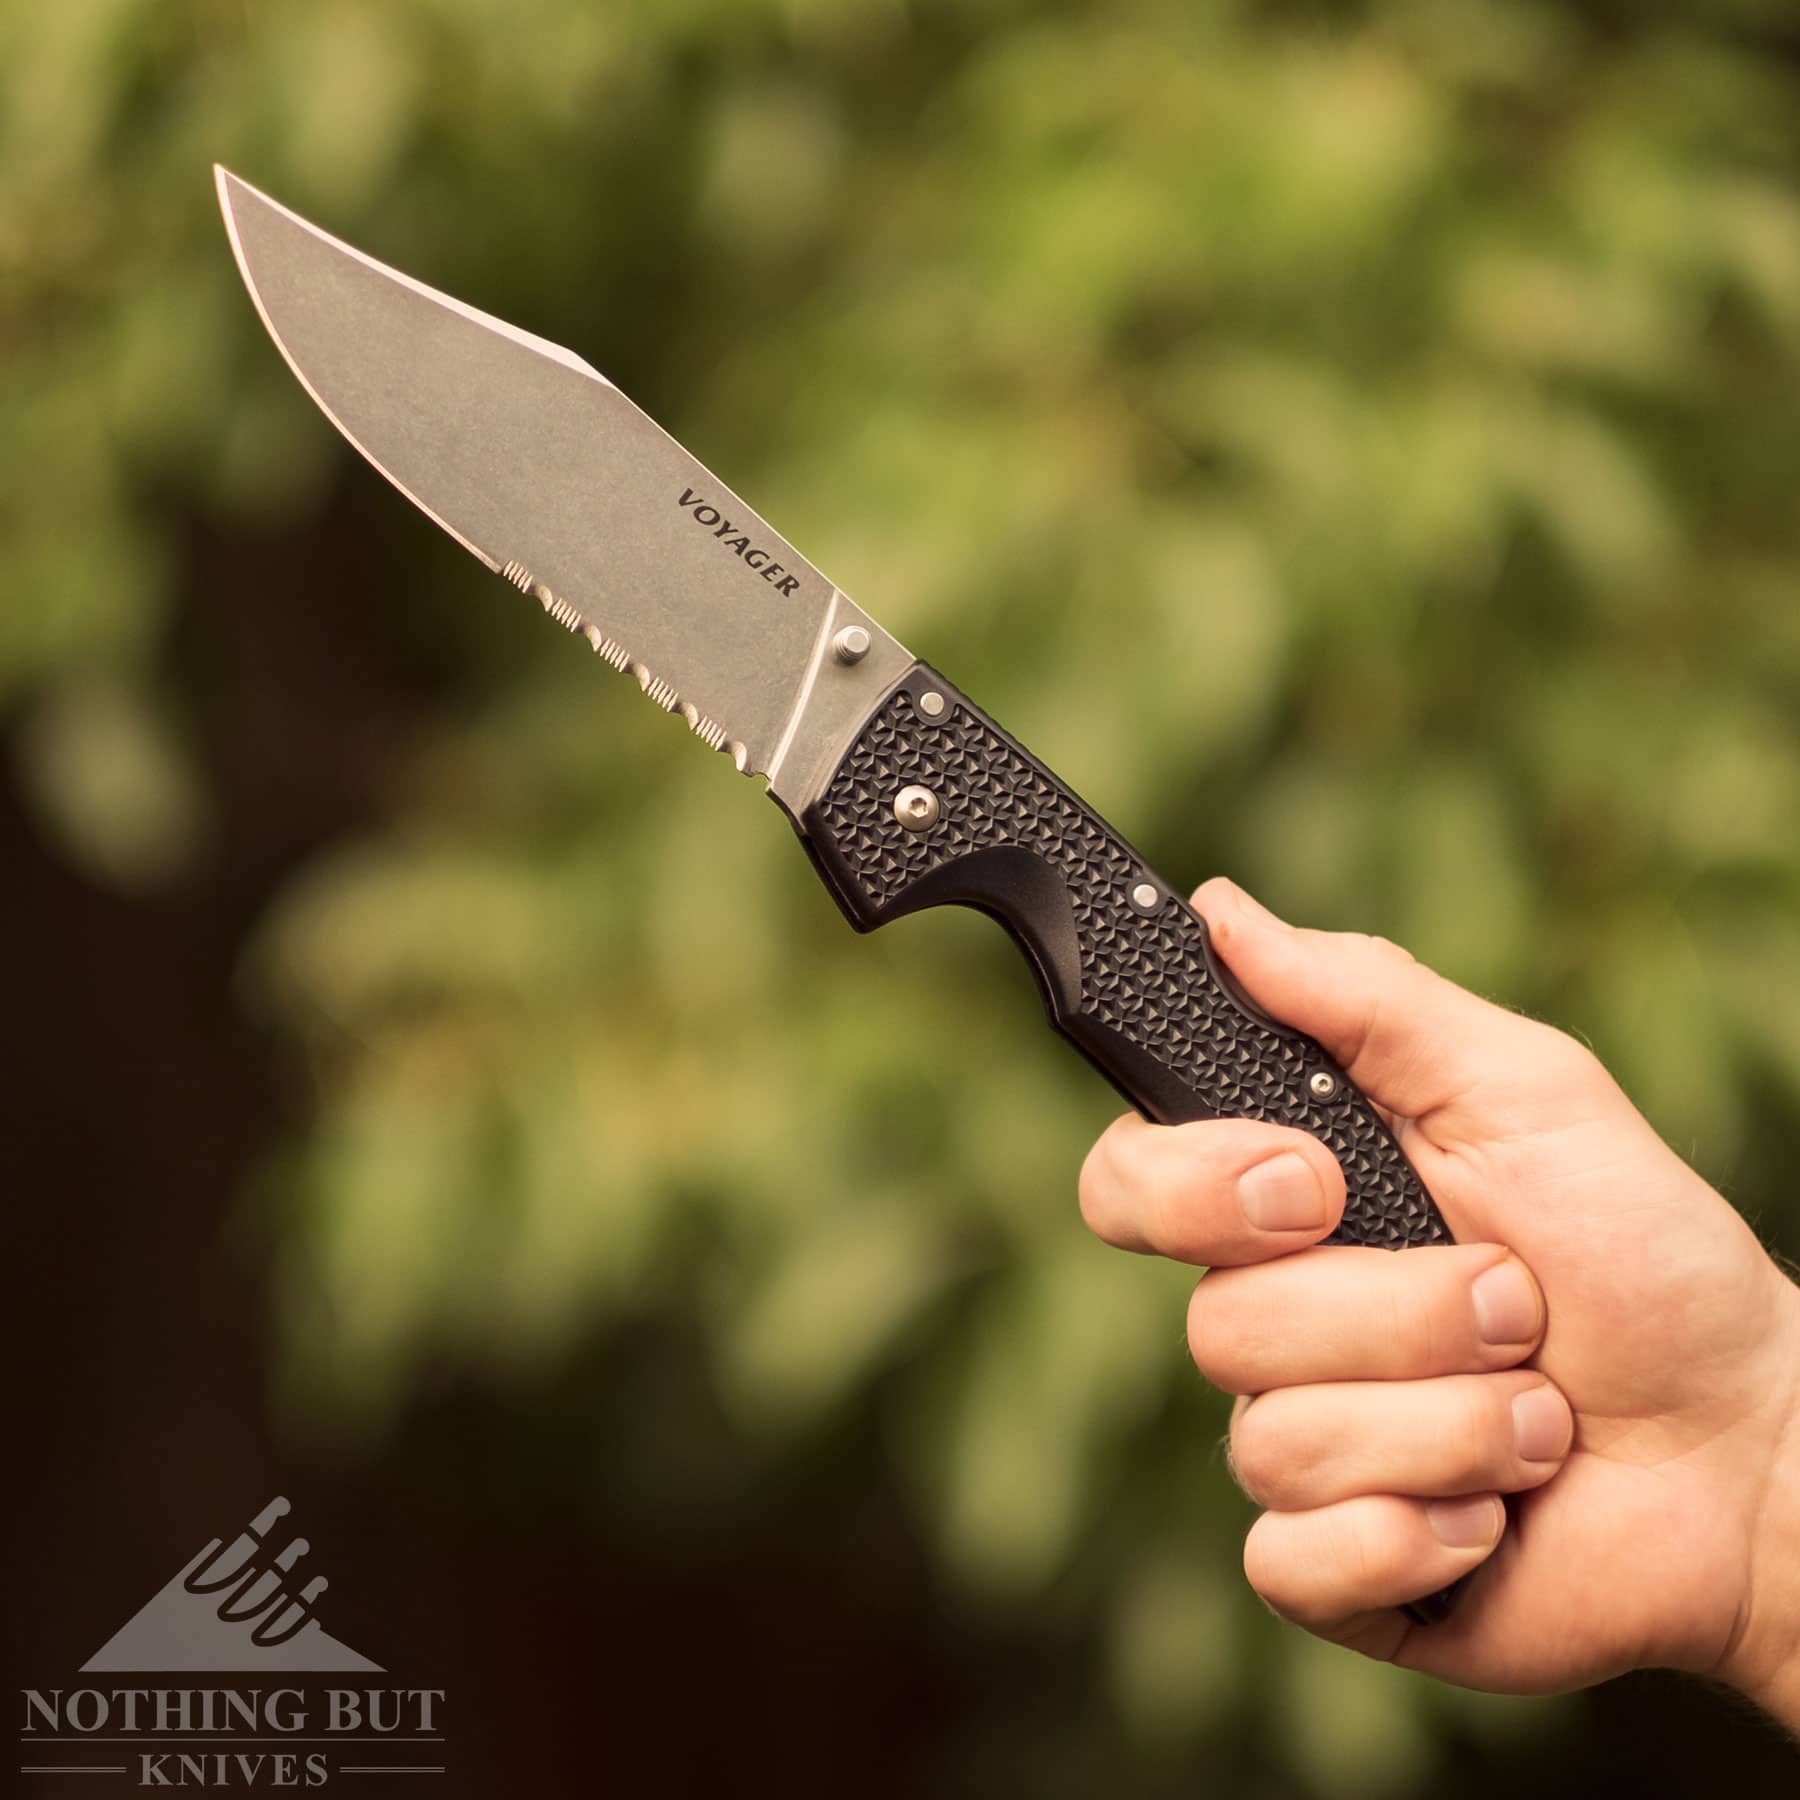 A person's hand gripping the rear section of the Voyager XL handle to show how versatile the knife is. 